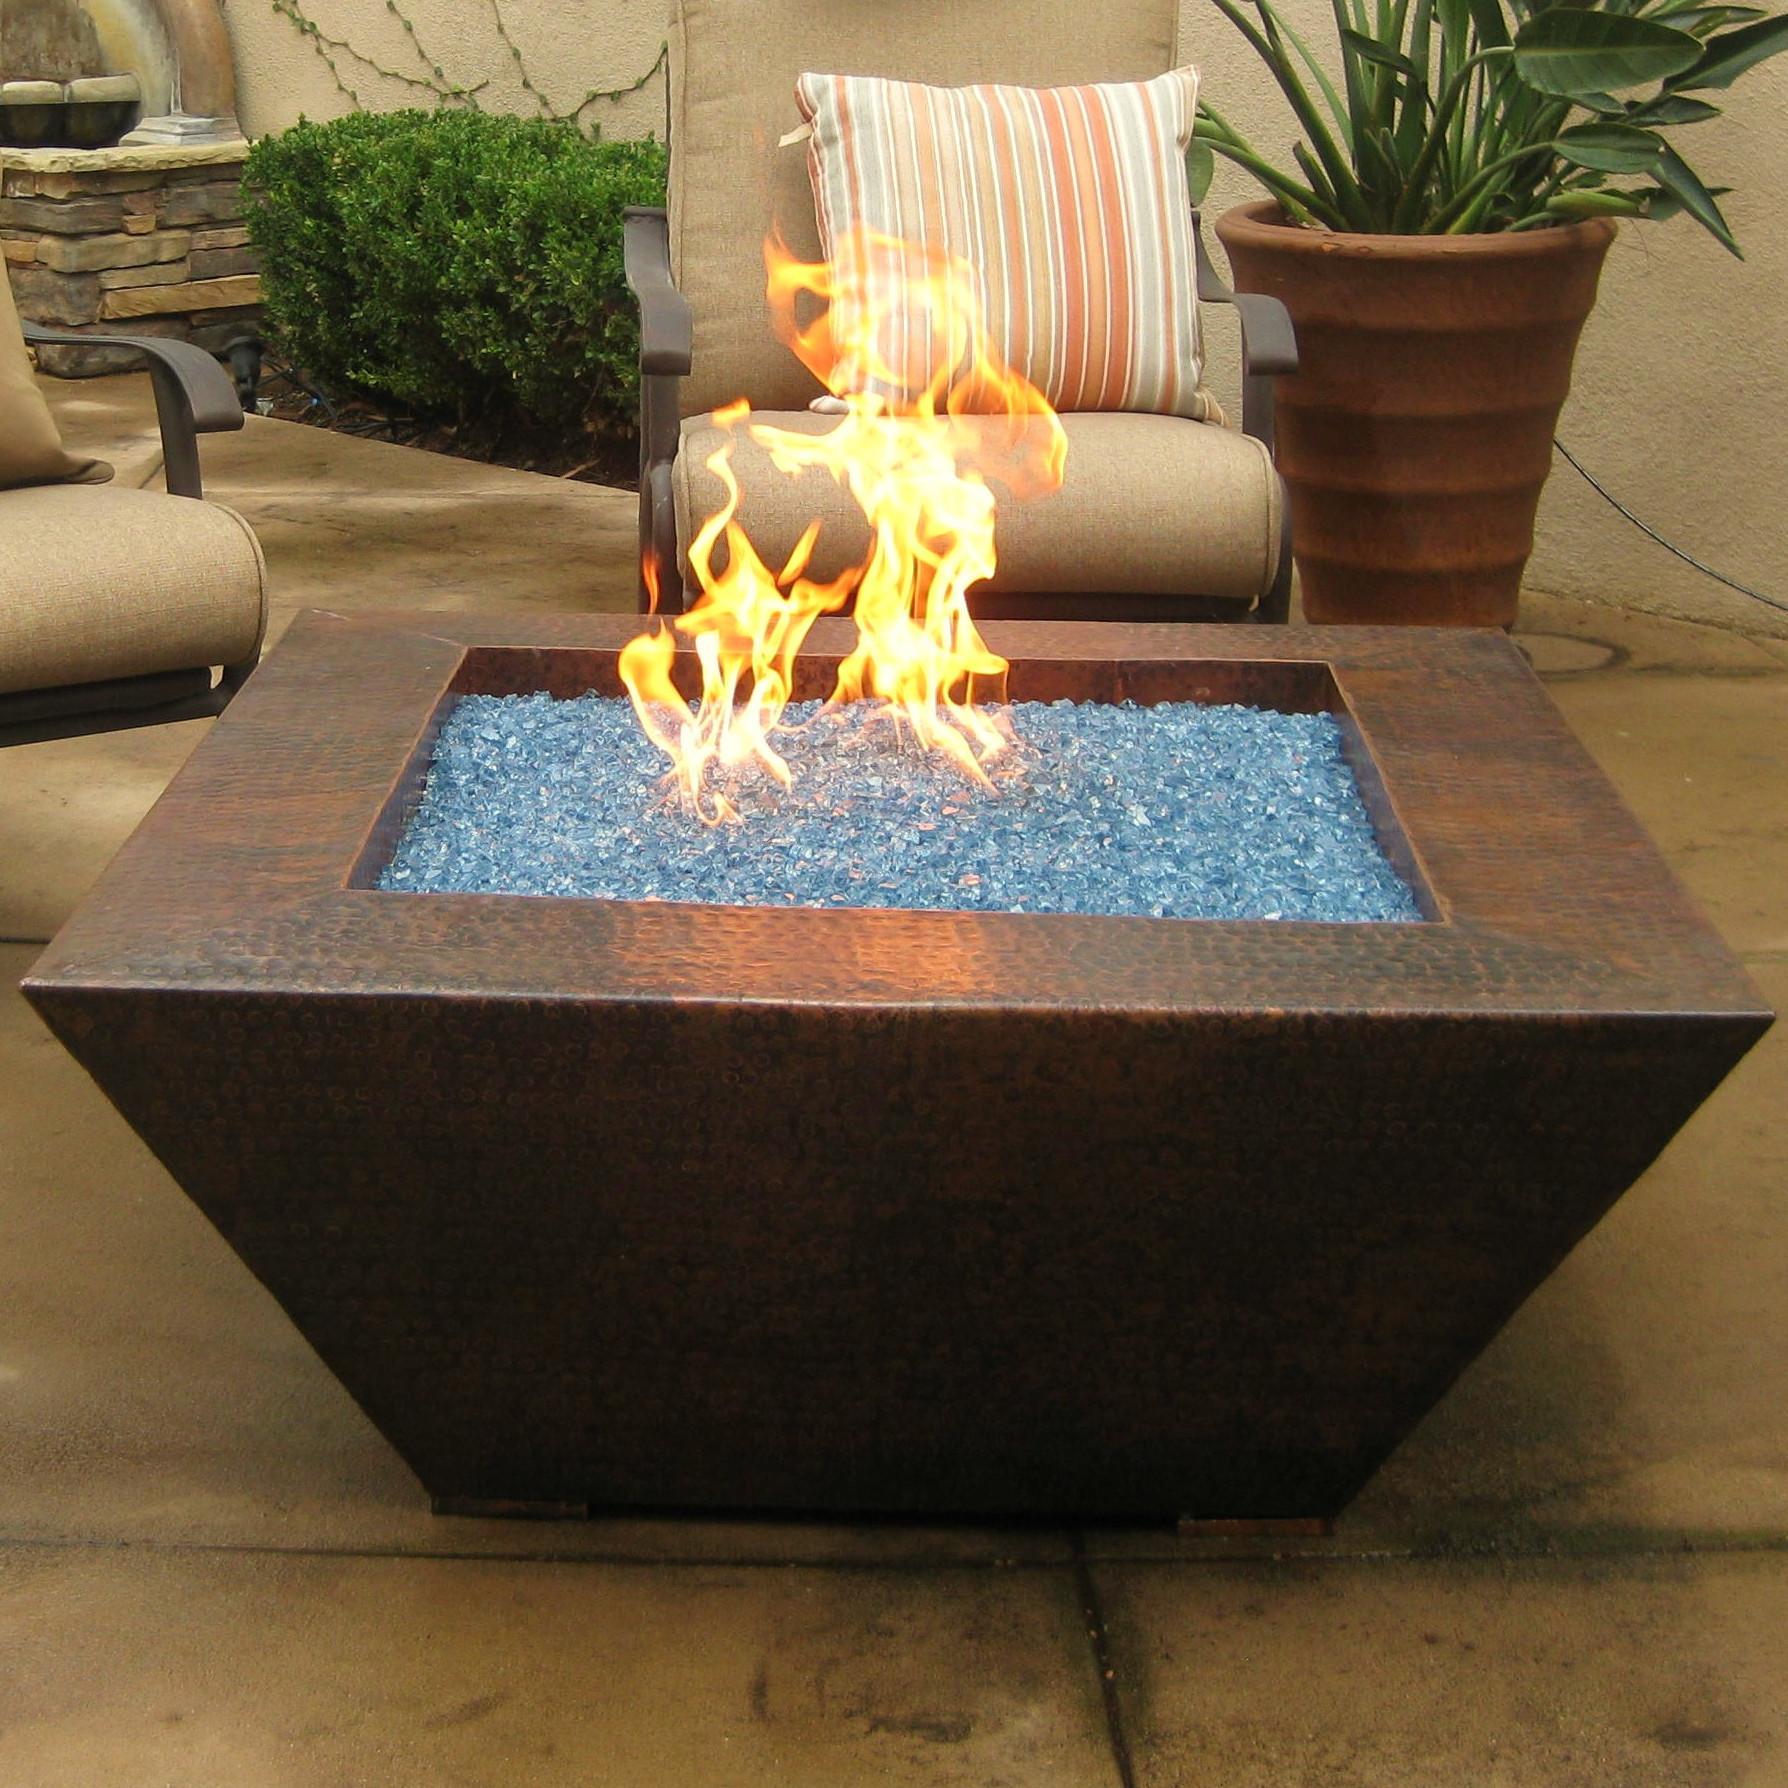 Propane Fire Pit Coffee Table
 10 Outdoor Propane Fire Pit Coffee Table